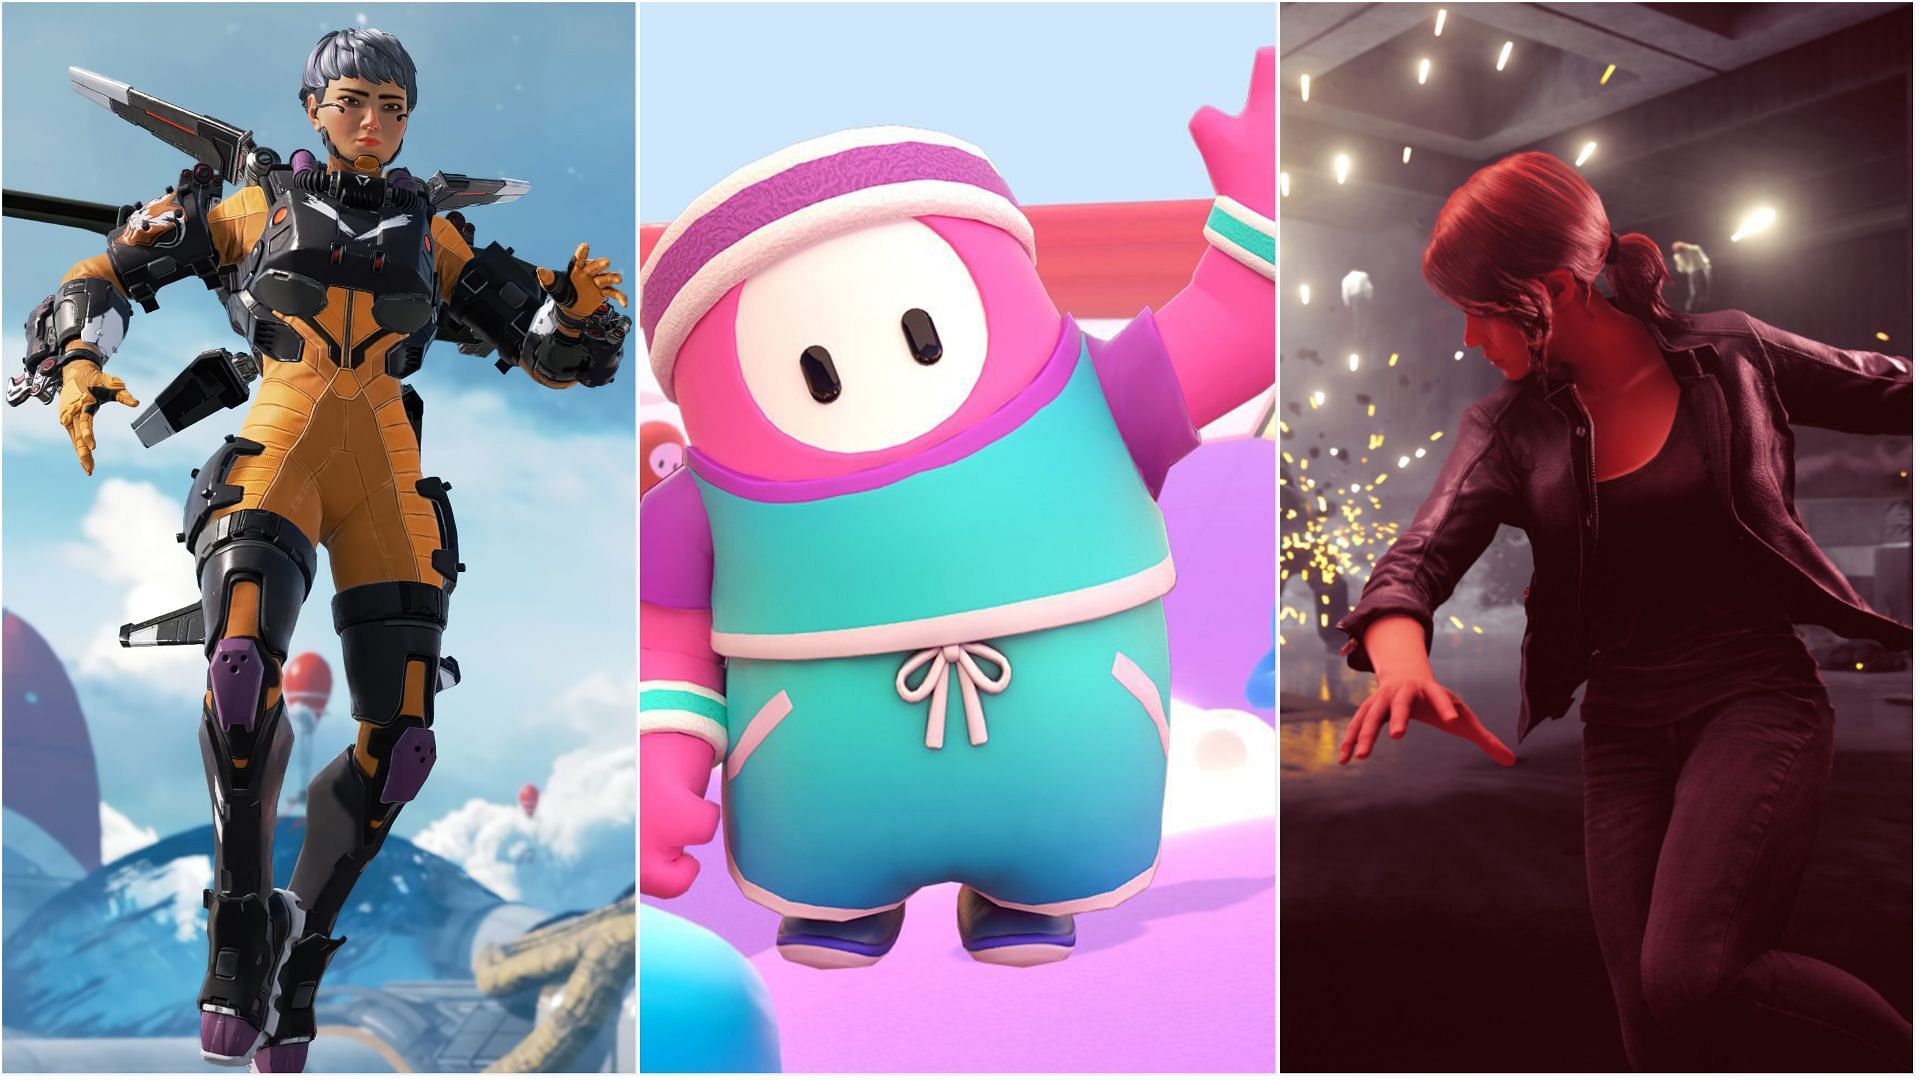 The best free Nintendo Switch games